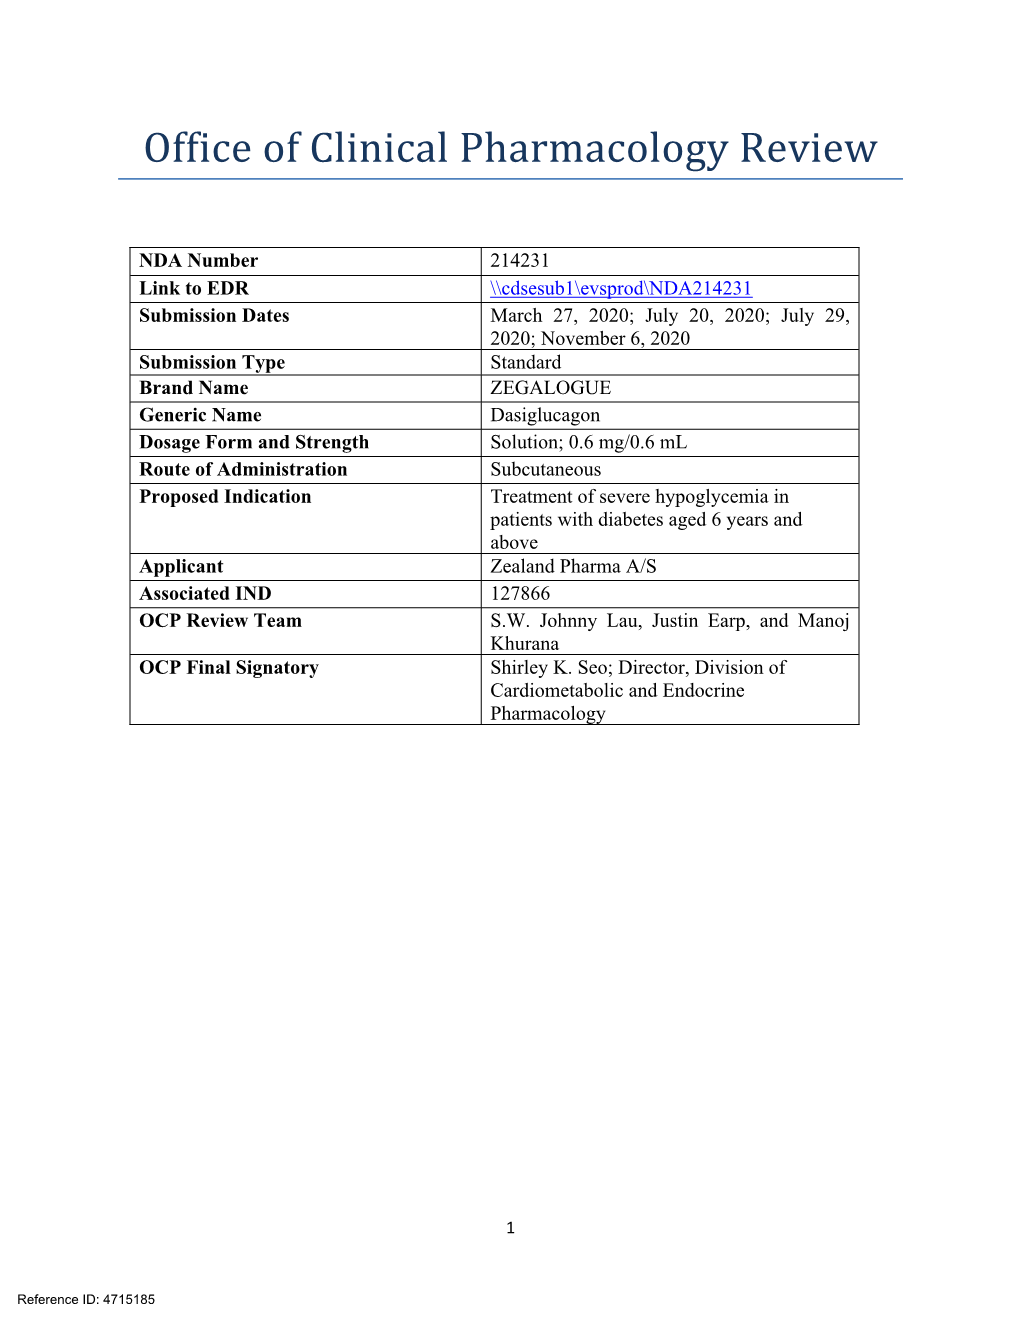 Clinical Pharmacology Review